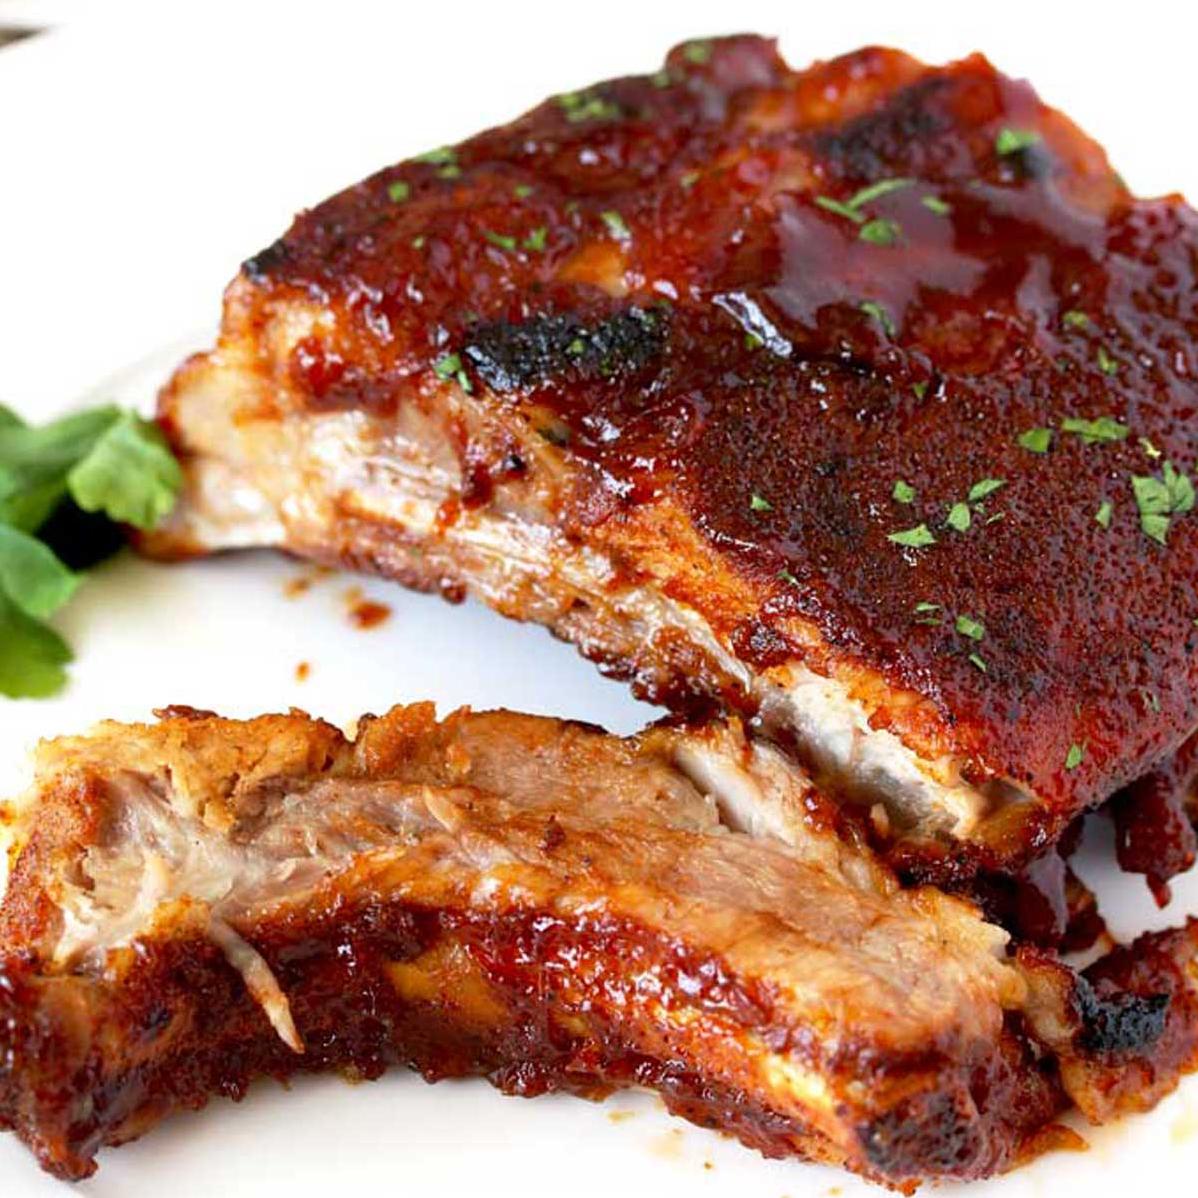  The secret to tender and juicy ribs without a grill